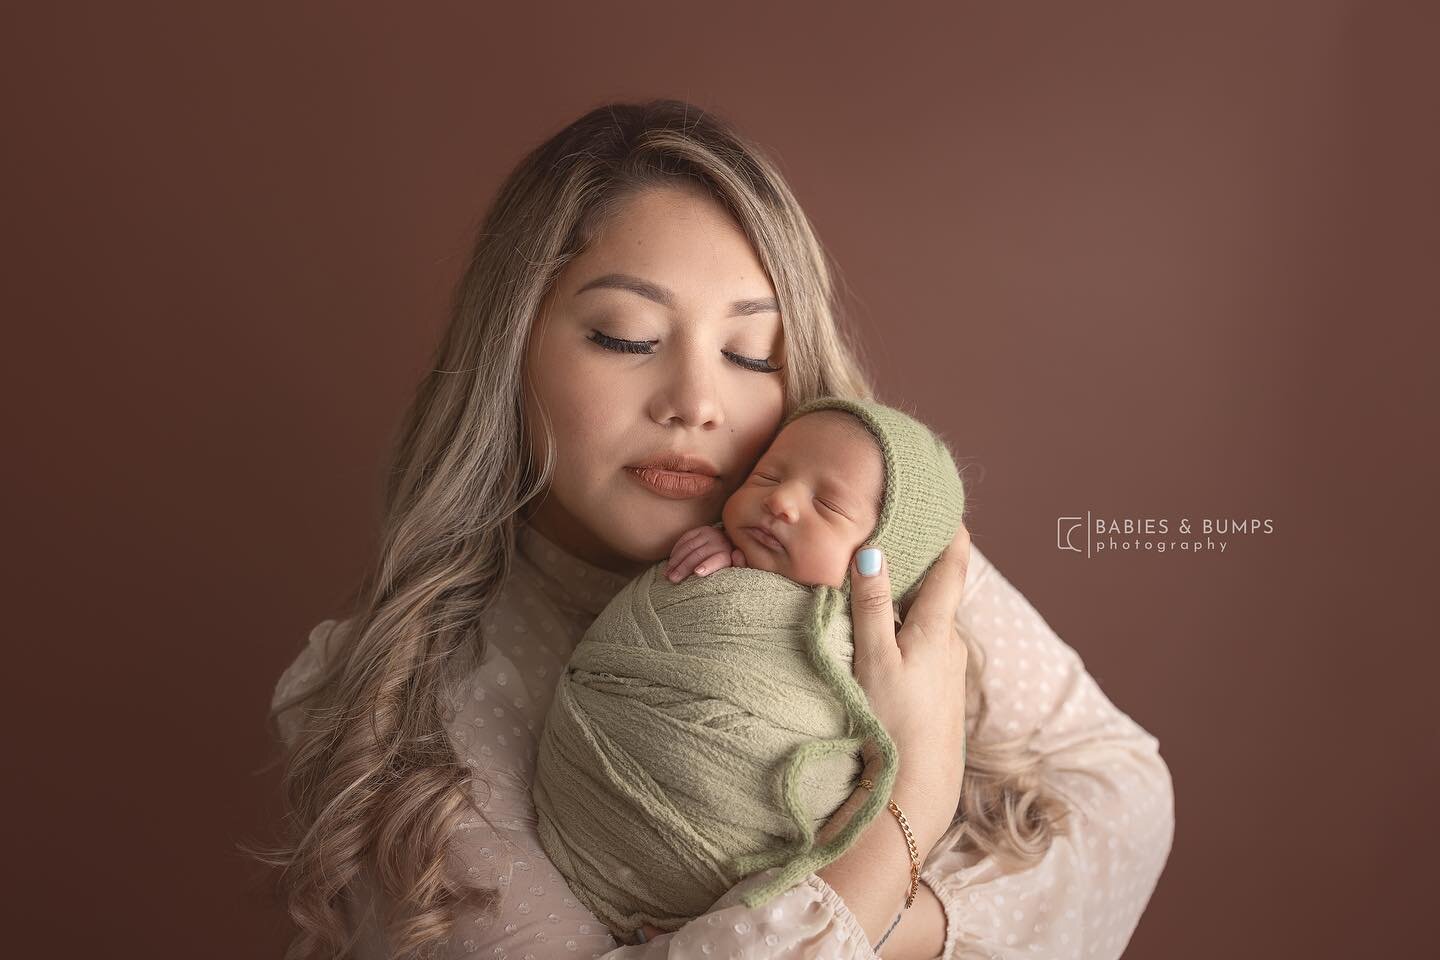 💙💙 SANTIAGO 💙💙
Our goal is to create memories that celebrate the legacy you&rsquo;re marking. 
#Newbornsession&nbsp;#Newbornphotoshoot&nbsp;#Newbornphotographer&nbsp;#Oneweekoldbabies&nbsp;#babiesphotography&nbsp;#Houston&nbsp;#HoustonPhotographe